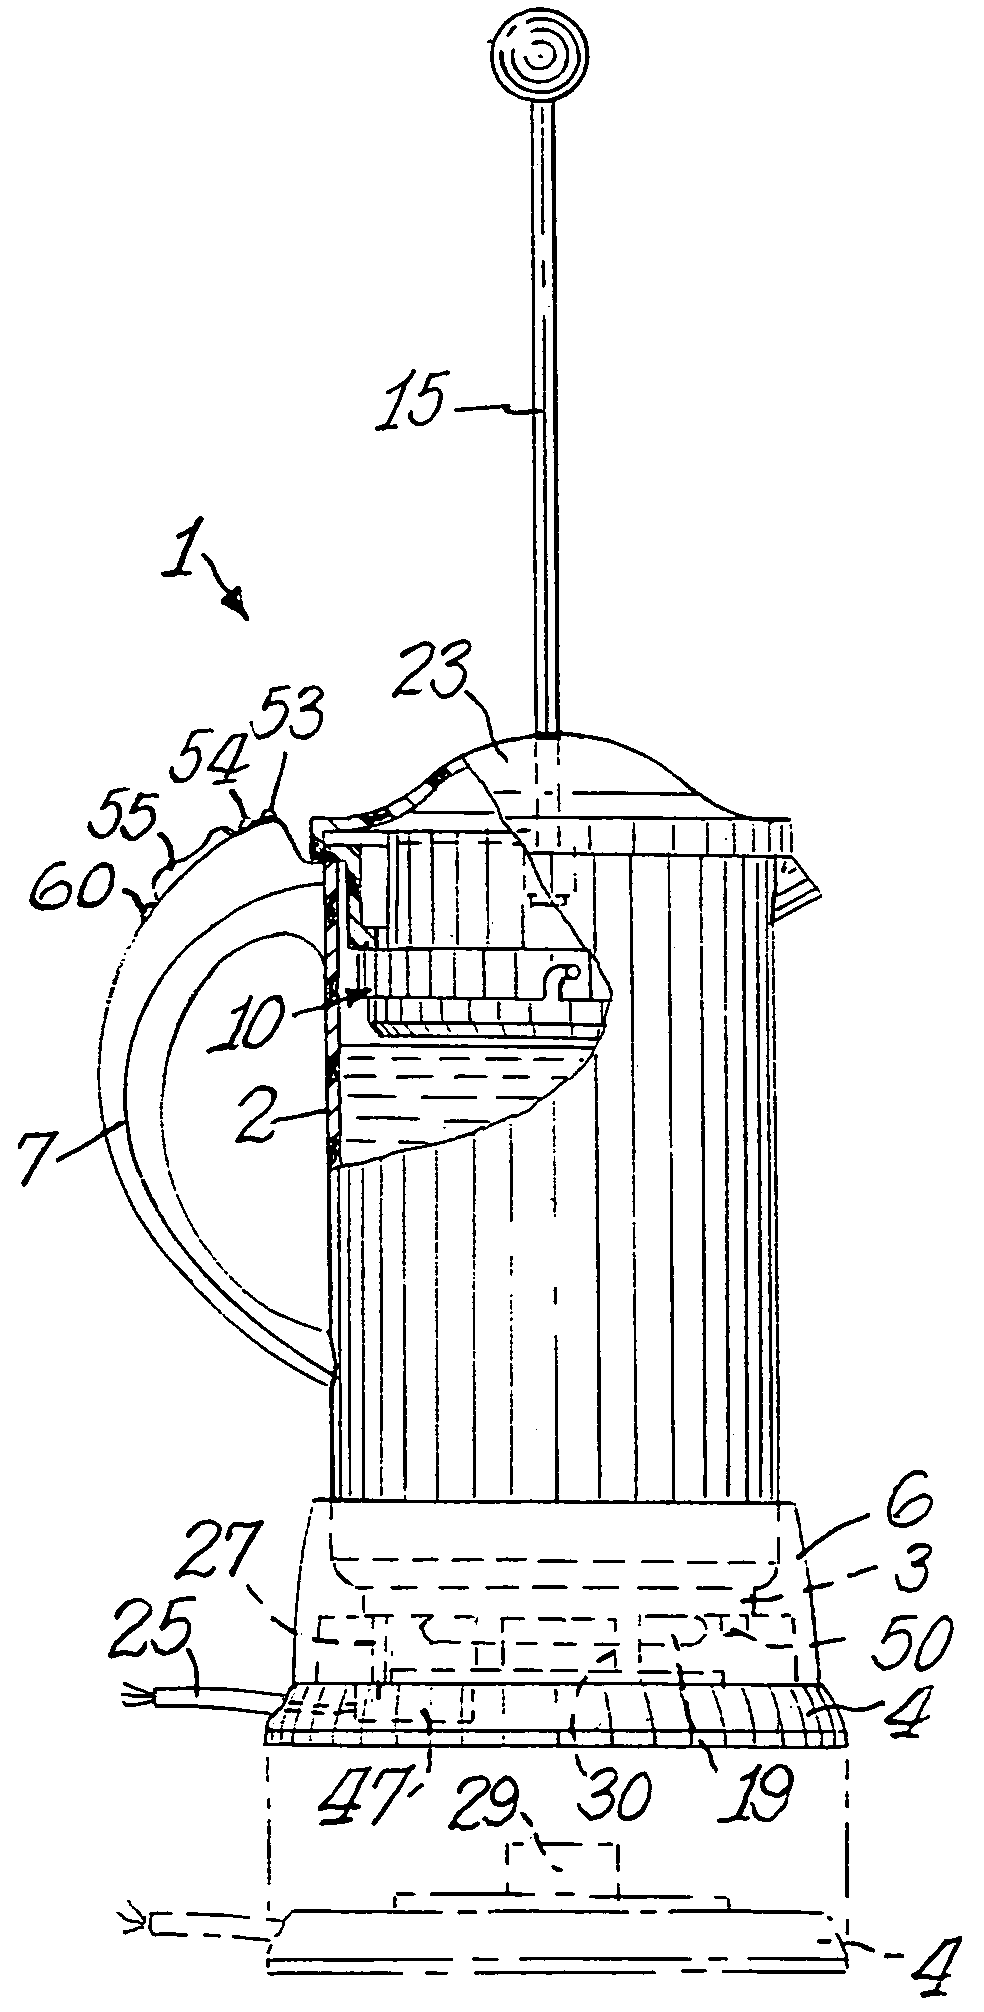 Apparatus for brewing beverages